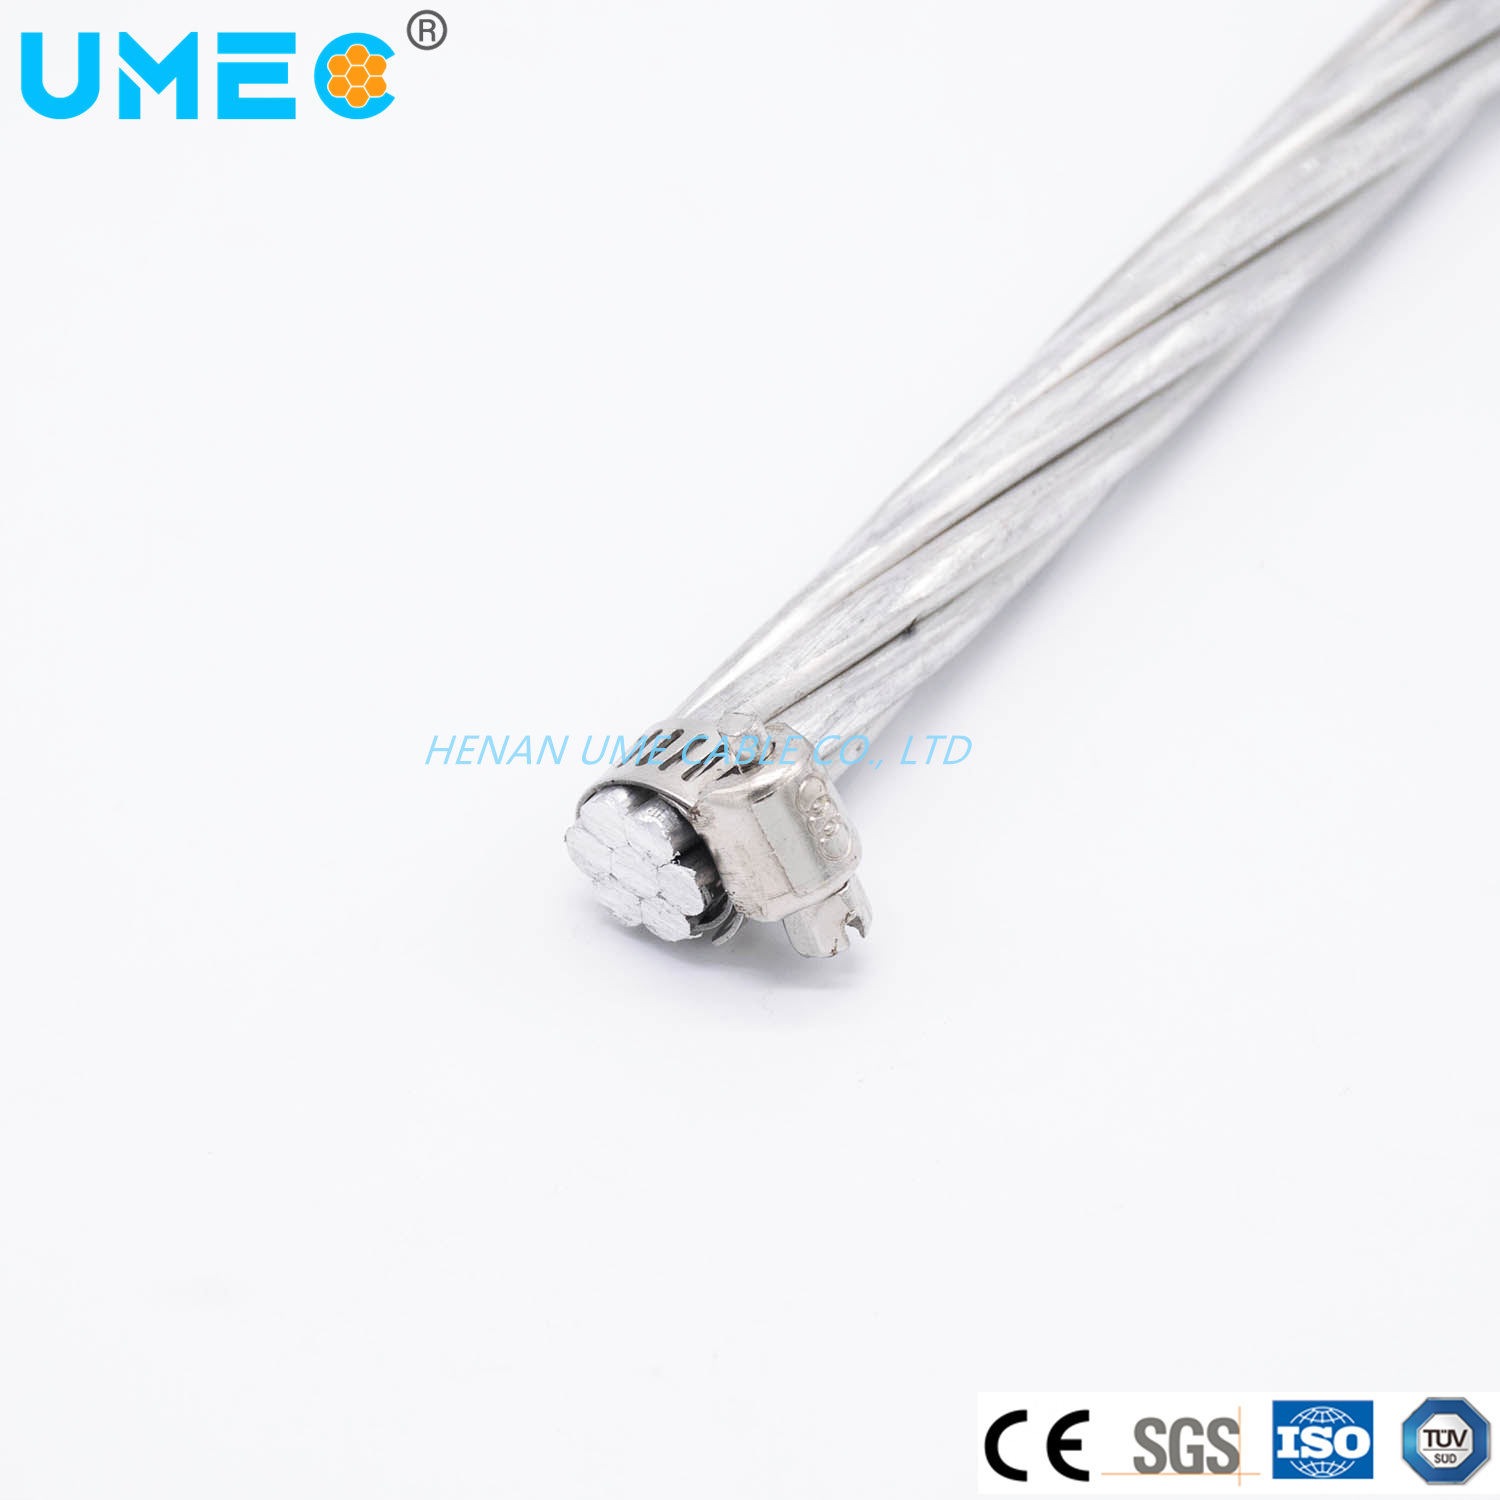 ASTM Standard All Aluminum Alloy Stranded Bare Almelec Cable 34.4mm2 54.6mm2 117mm2 148mm2 228mm2 288mm2 366mm2 AAAC AAC